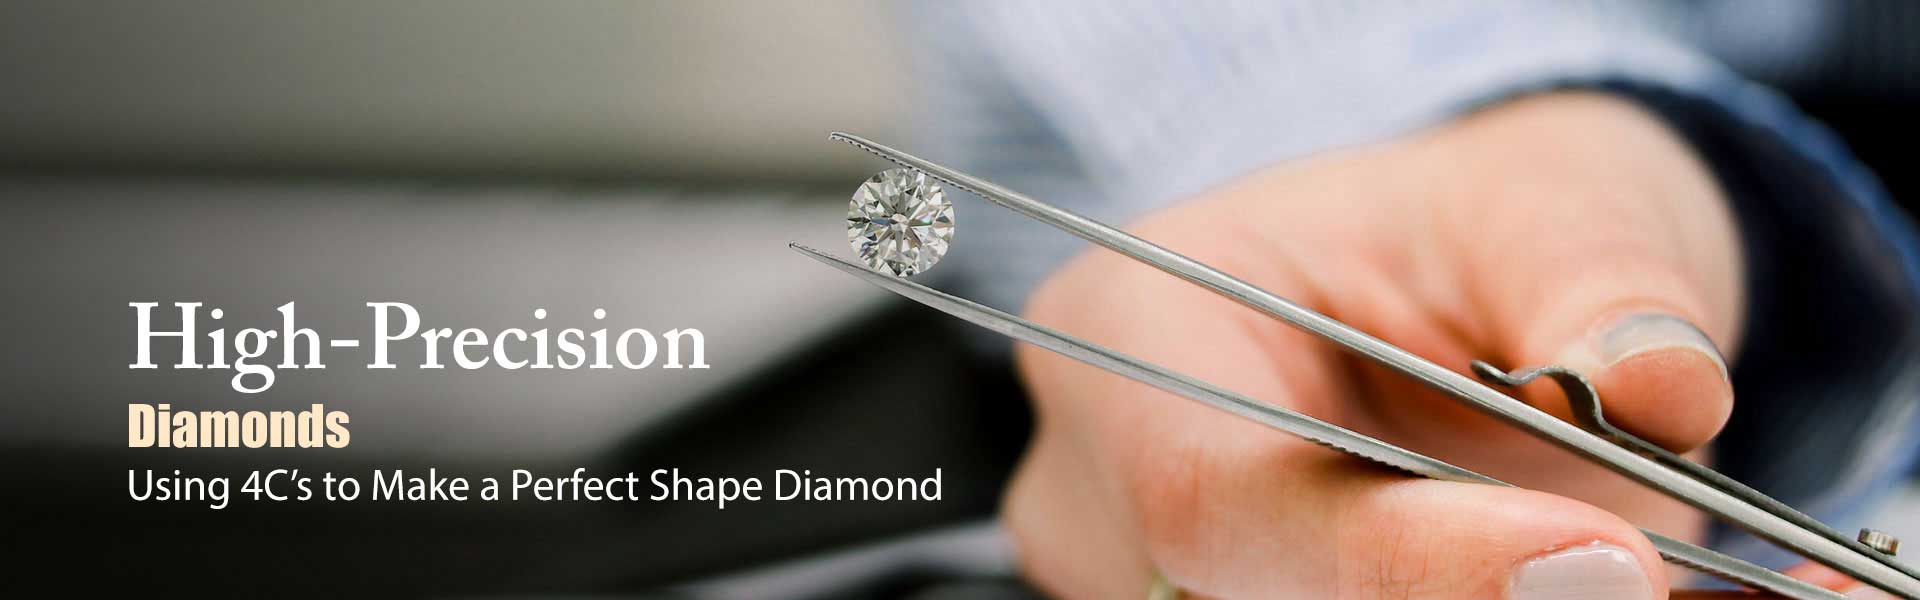  Certified Diamond  Manufacturers in New Zealand